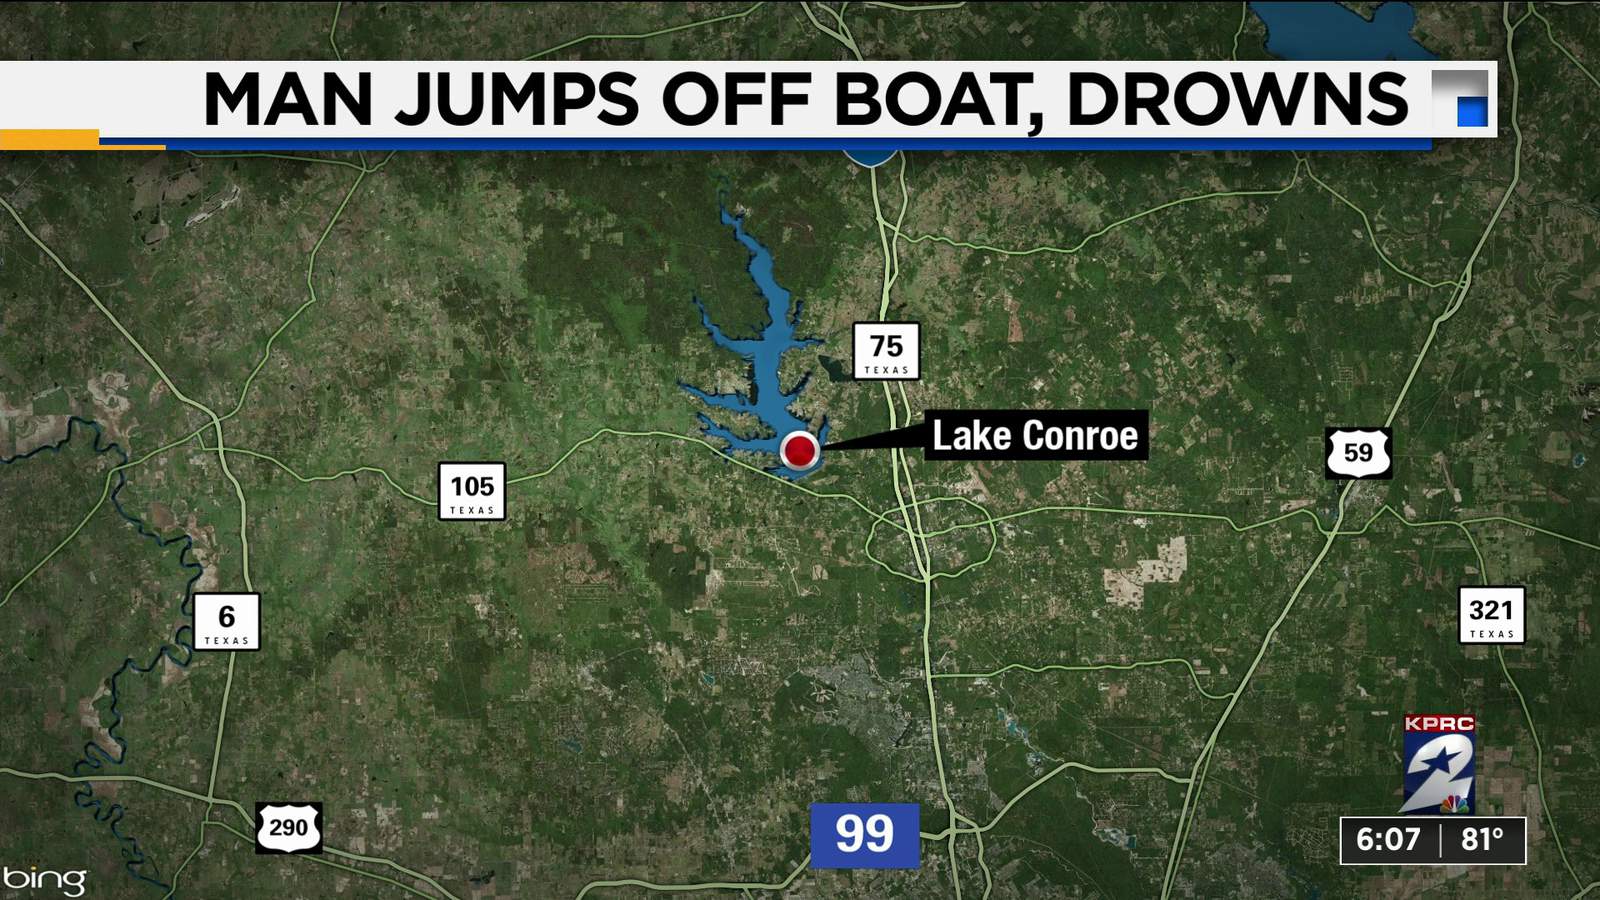 27-year-old man drowns in Lake Conroe after jumping off boat